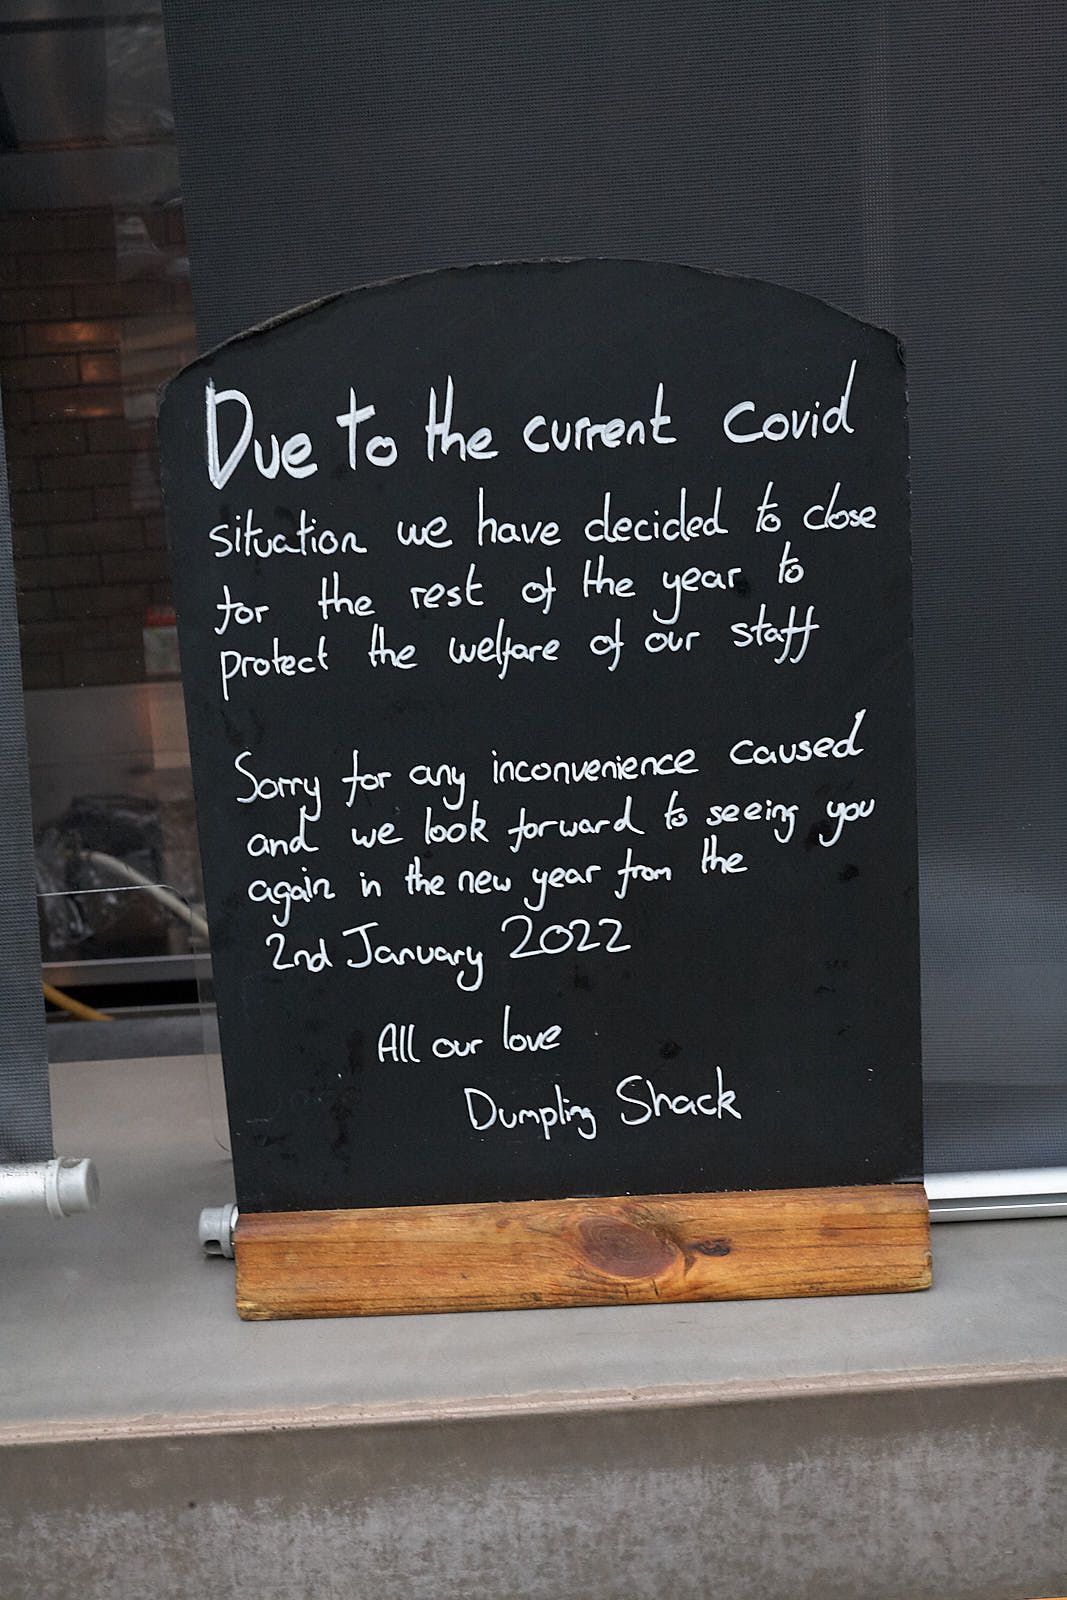 Dumpling Shack’s sign in Spitalfields spells out the reason behind its early closure 